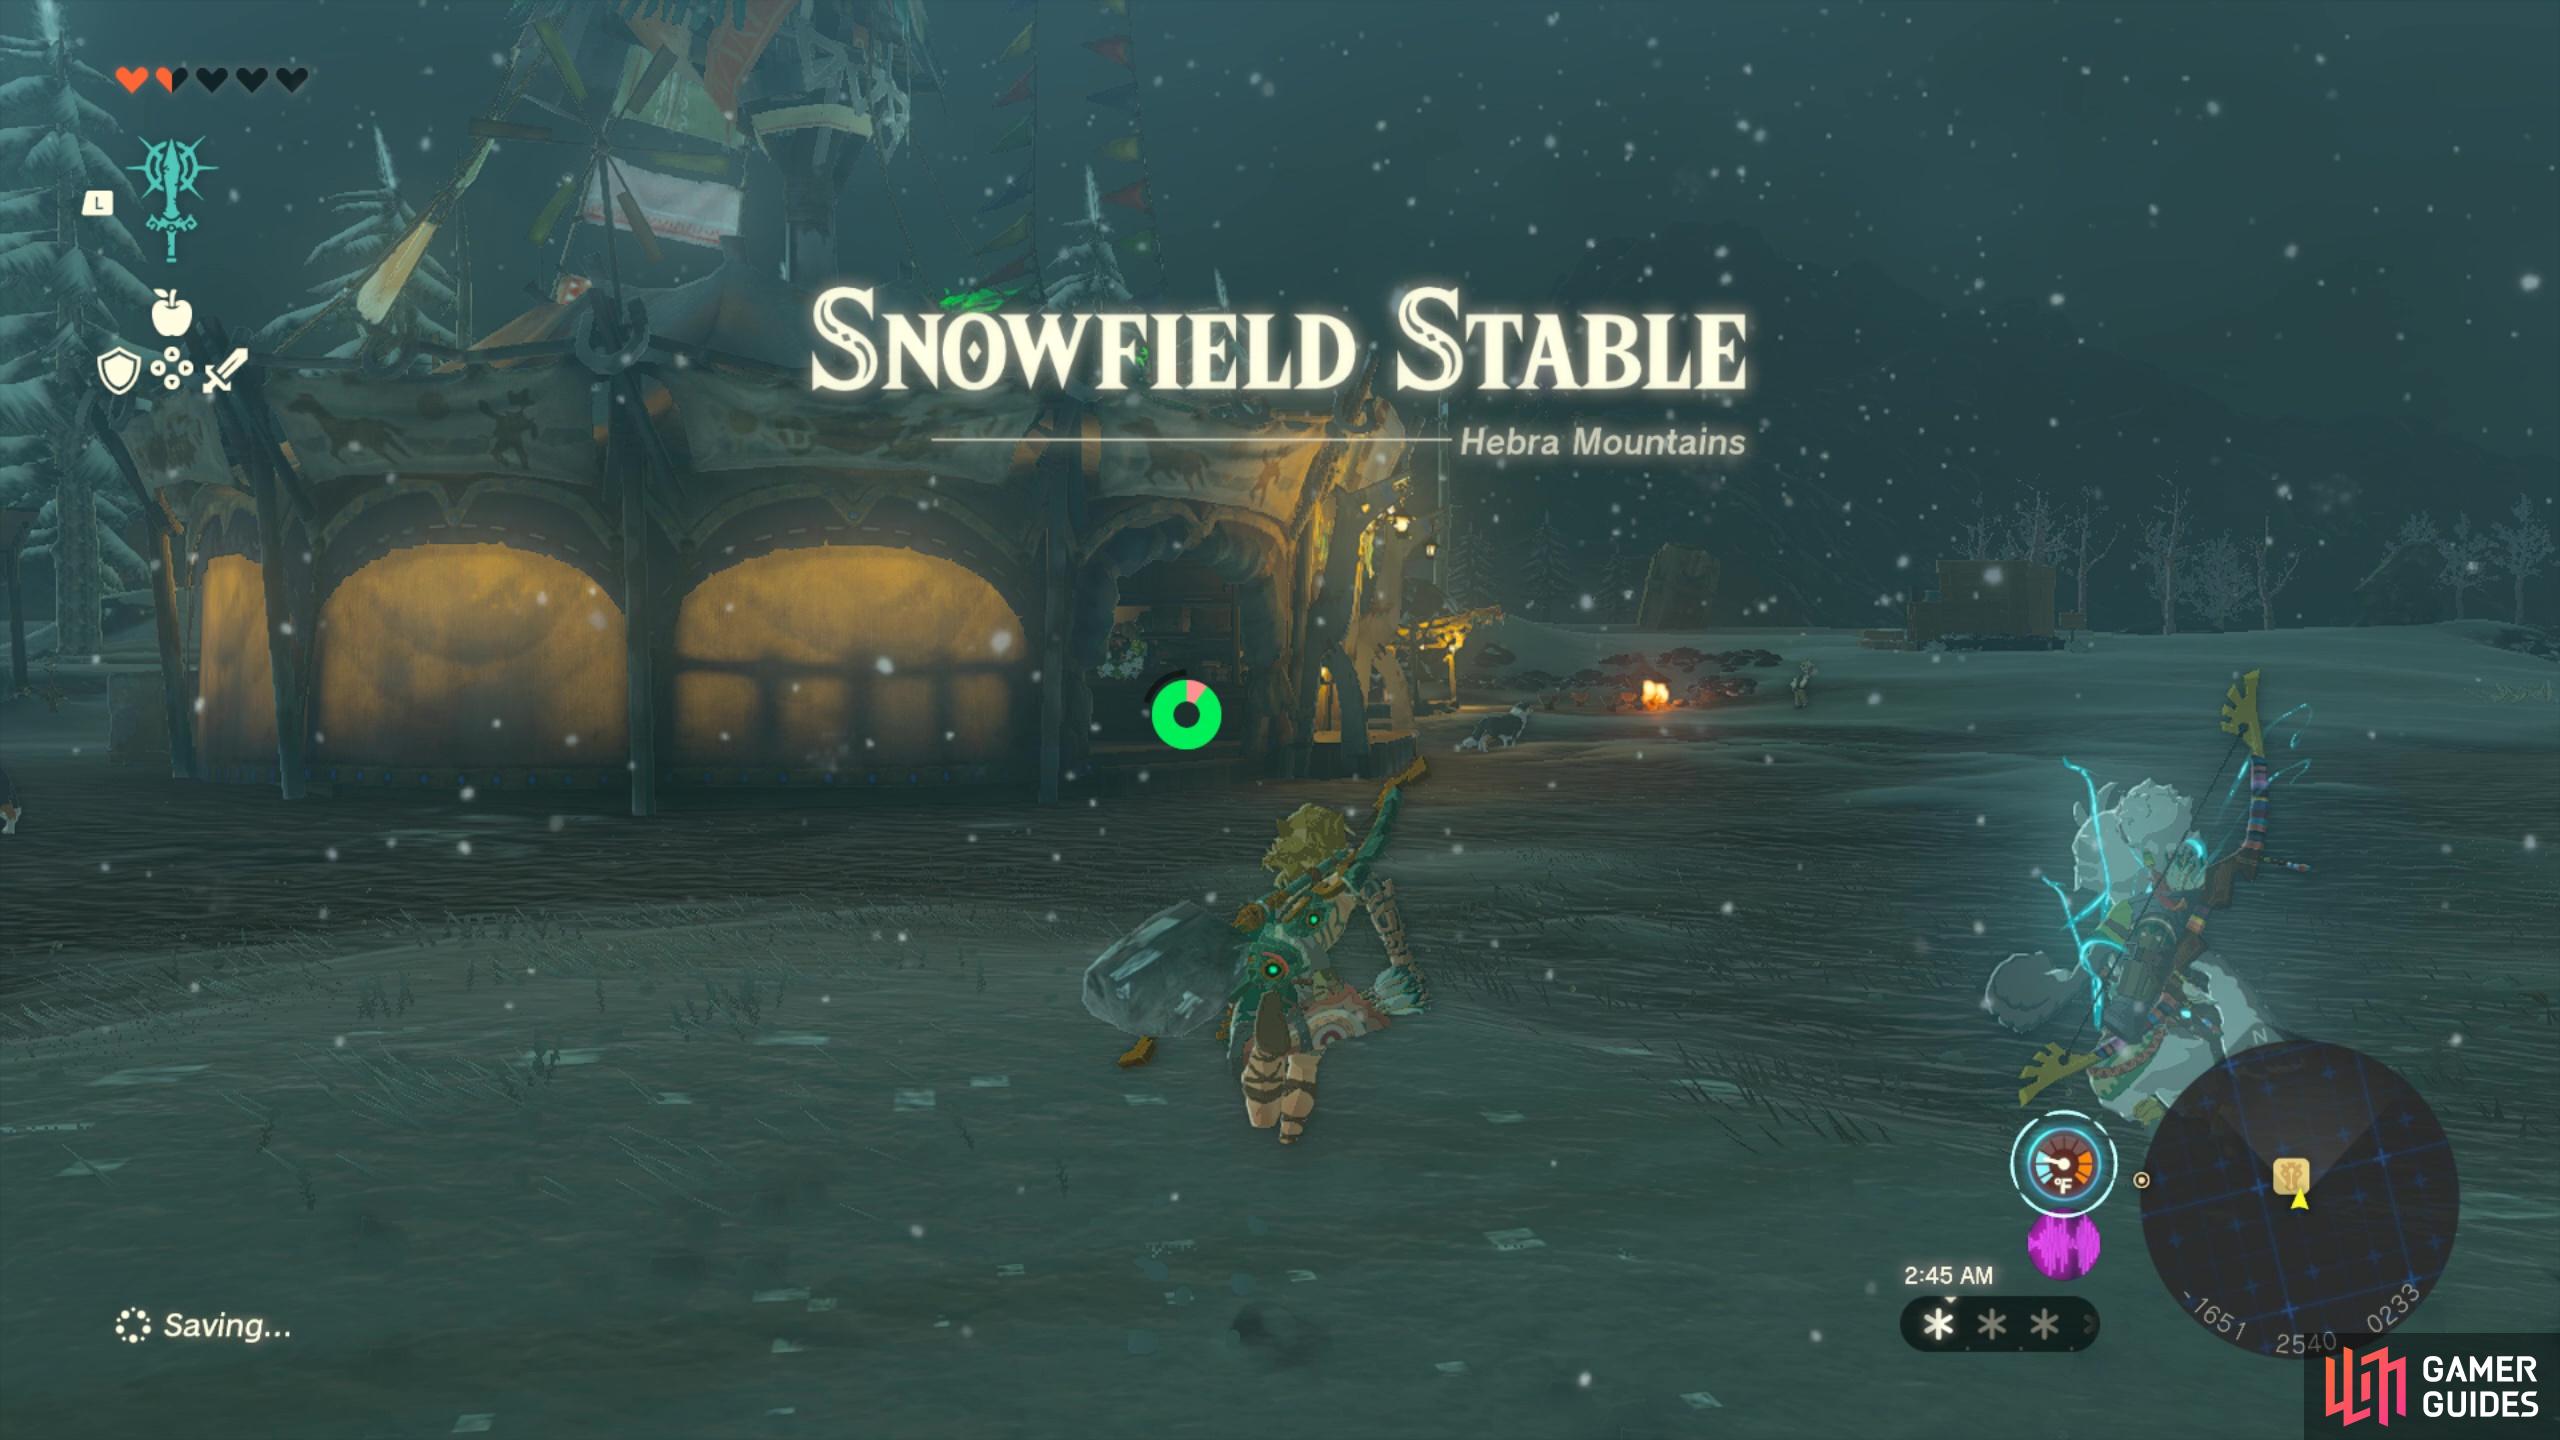 Start your journey from Snowfield Stable.